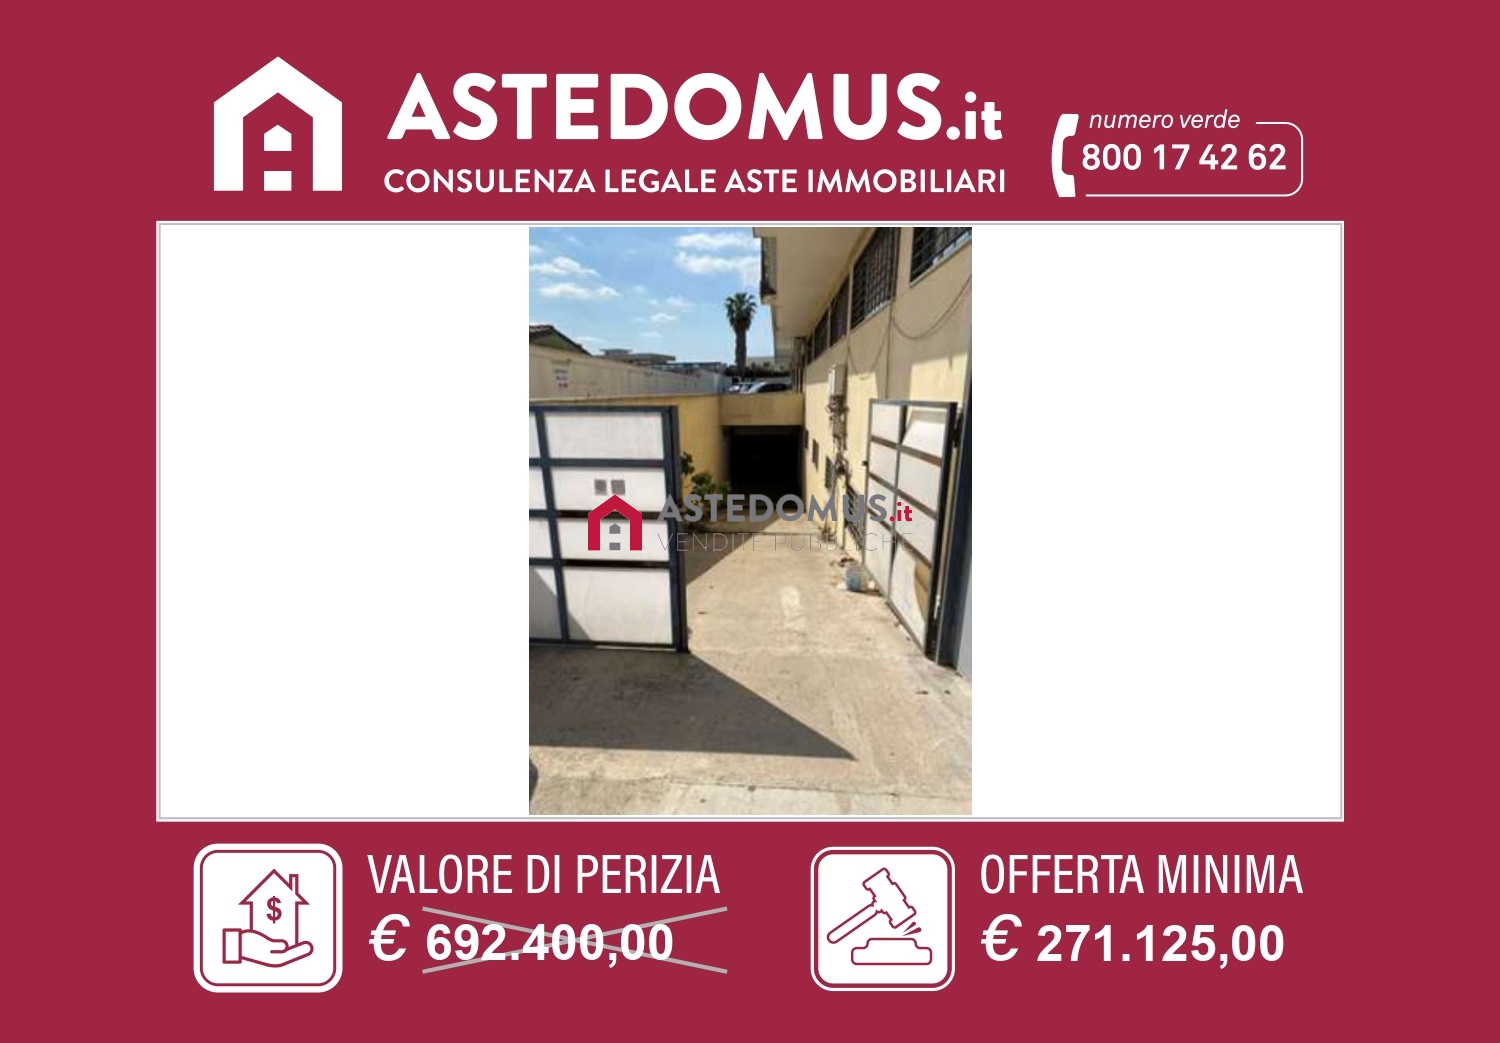 Locale commerciale classe A1 a Sant'Antimo